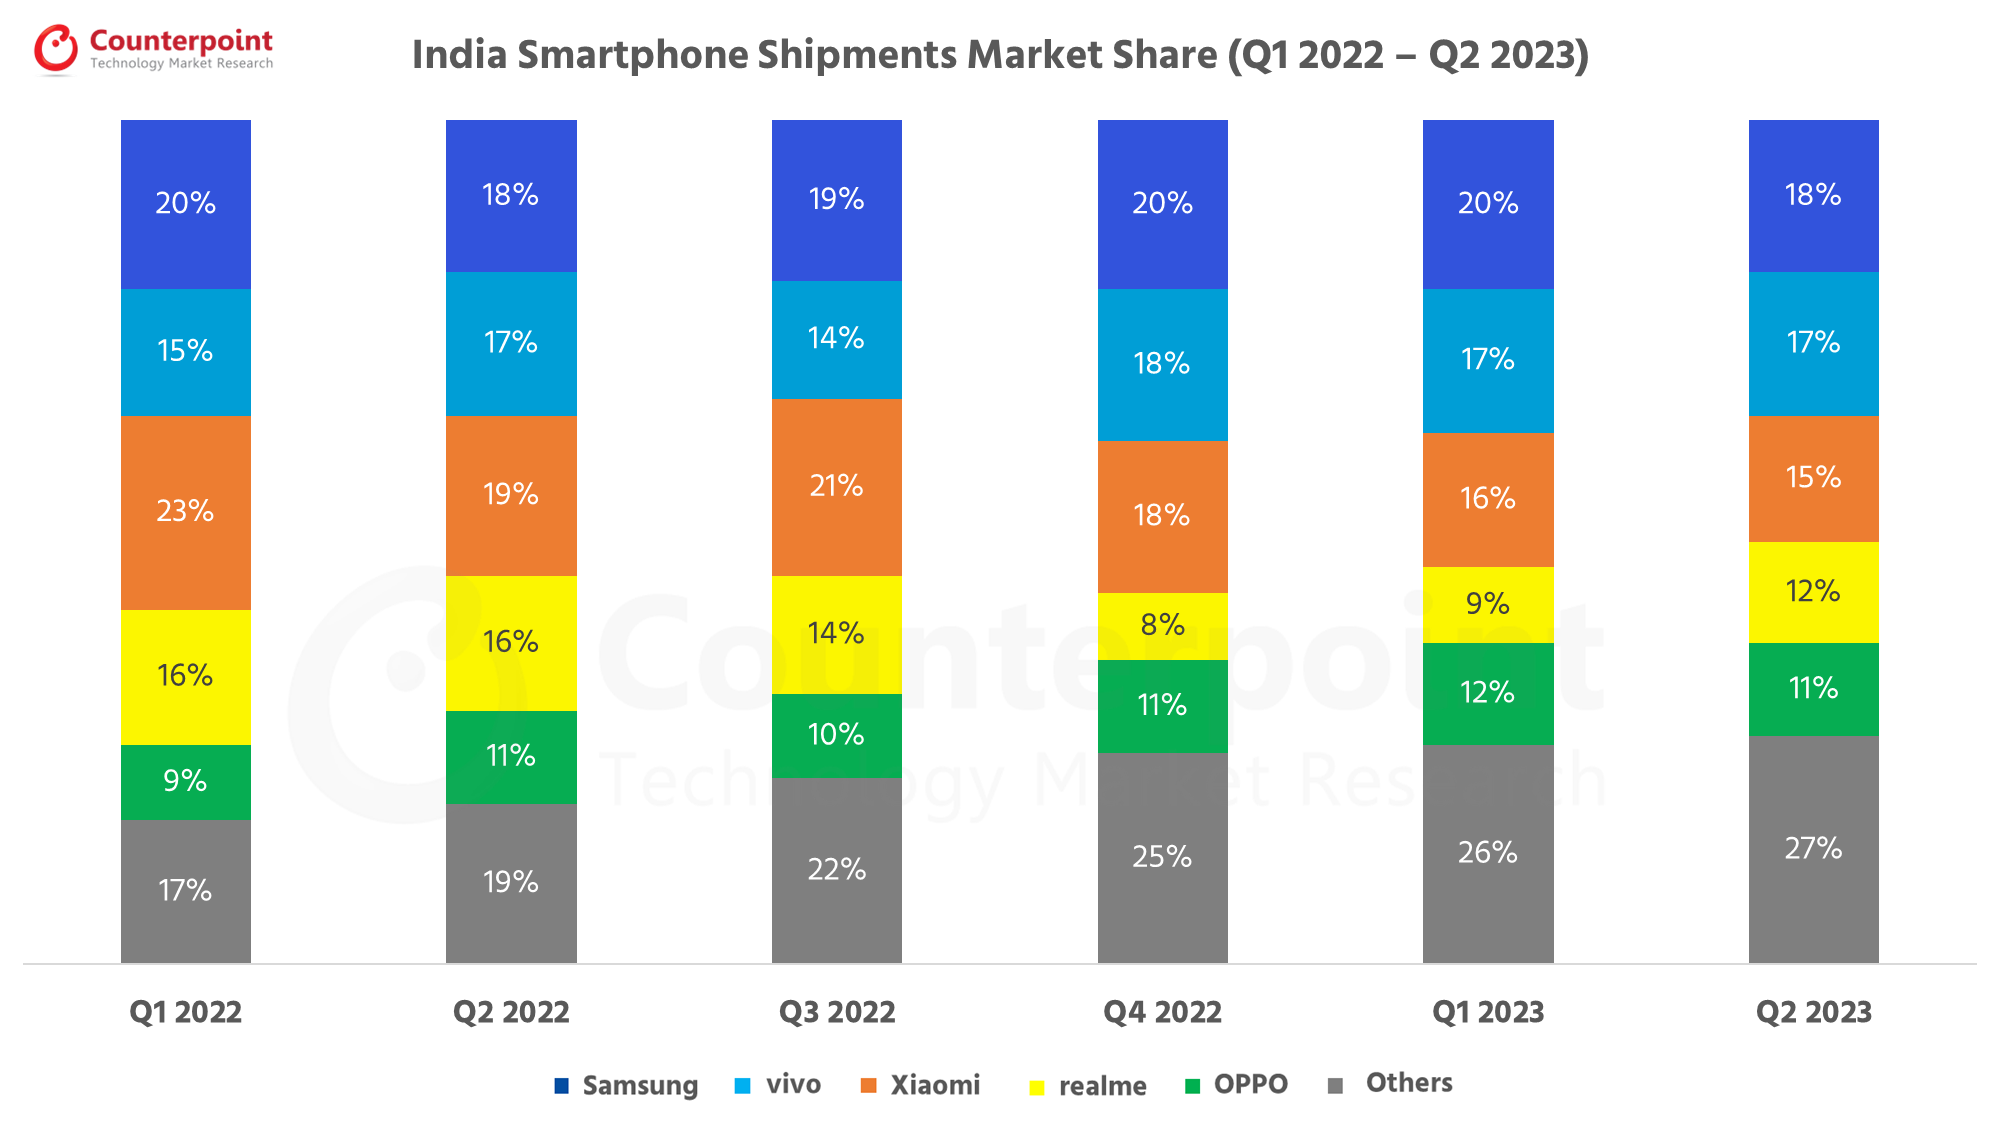 Counterpoint-Research-India-Smartphone-Market-Share-Q2-2023.png